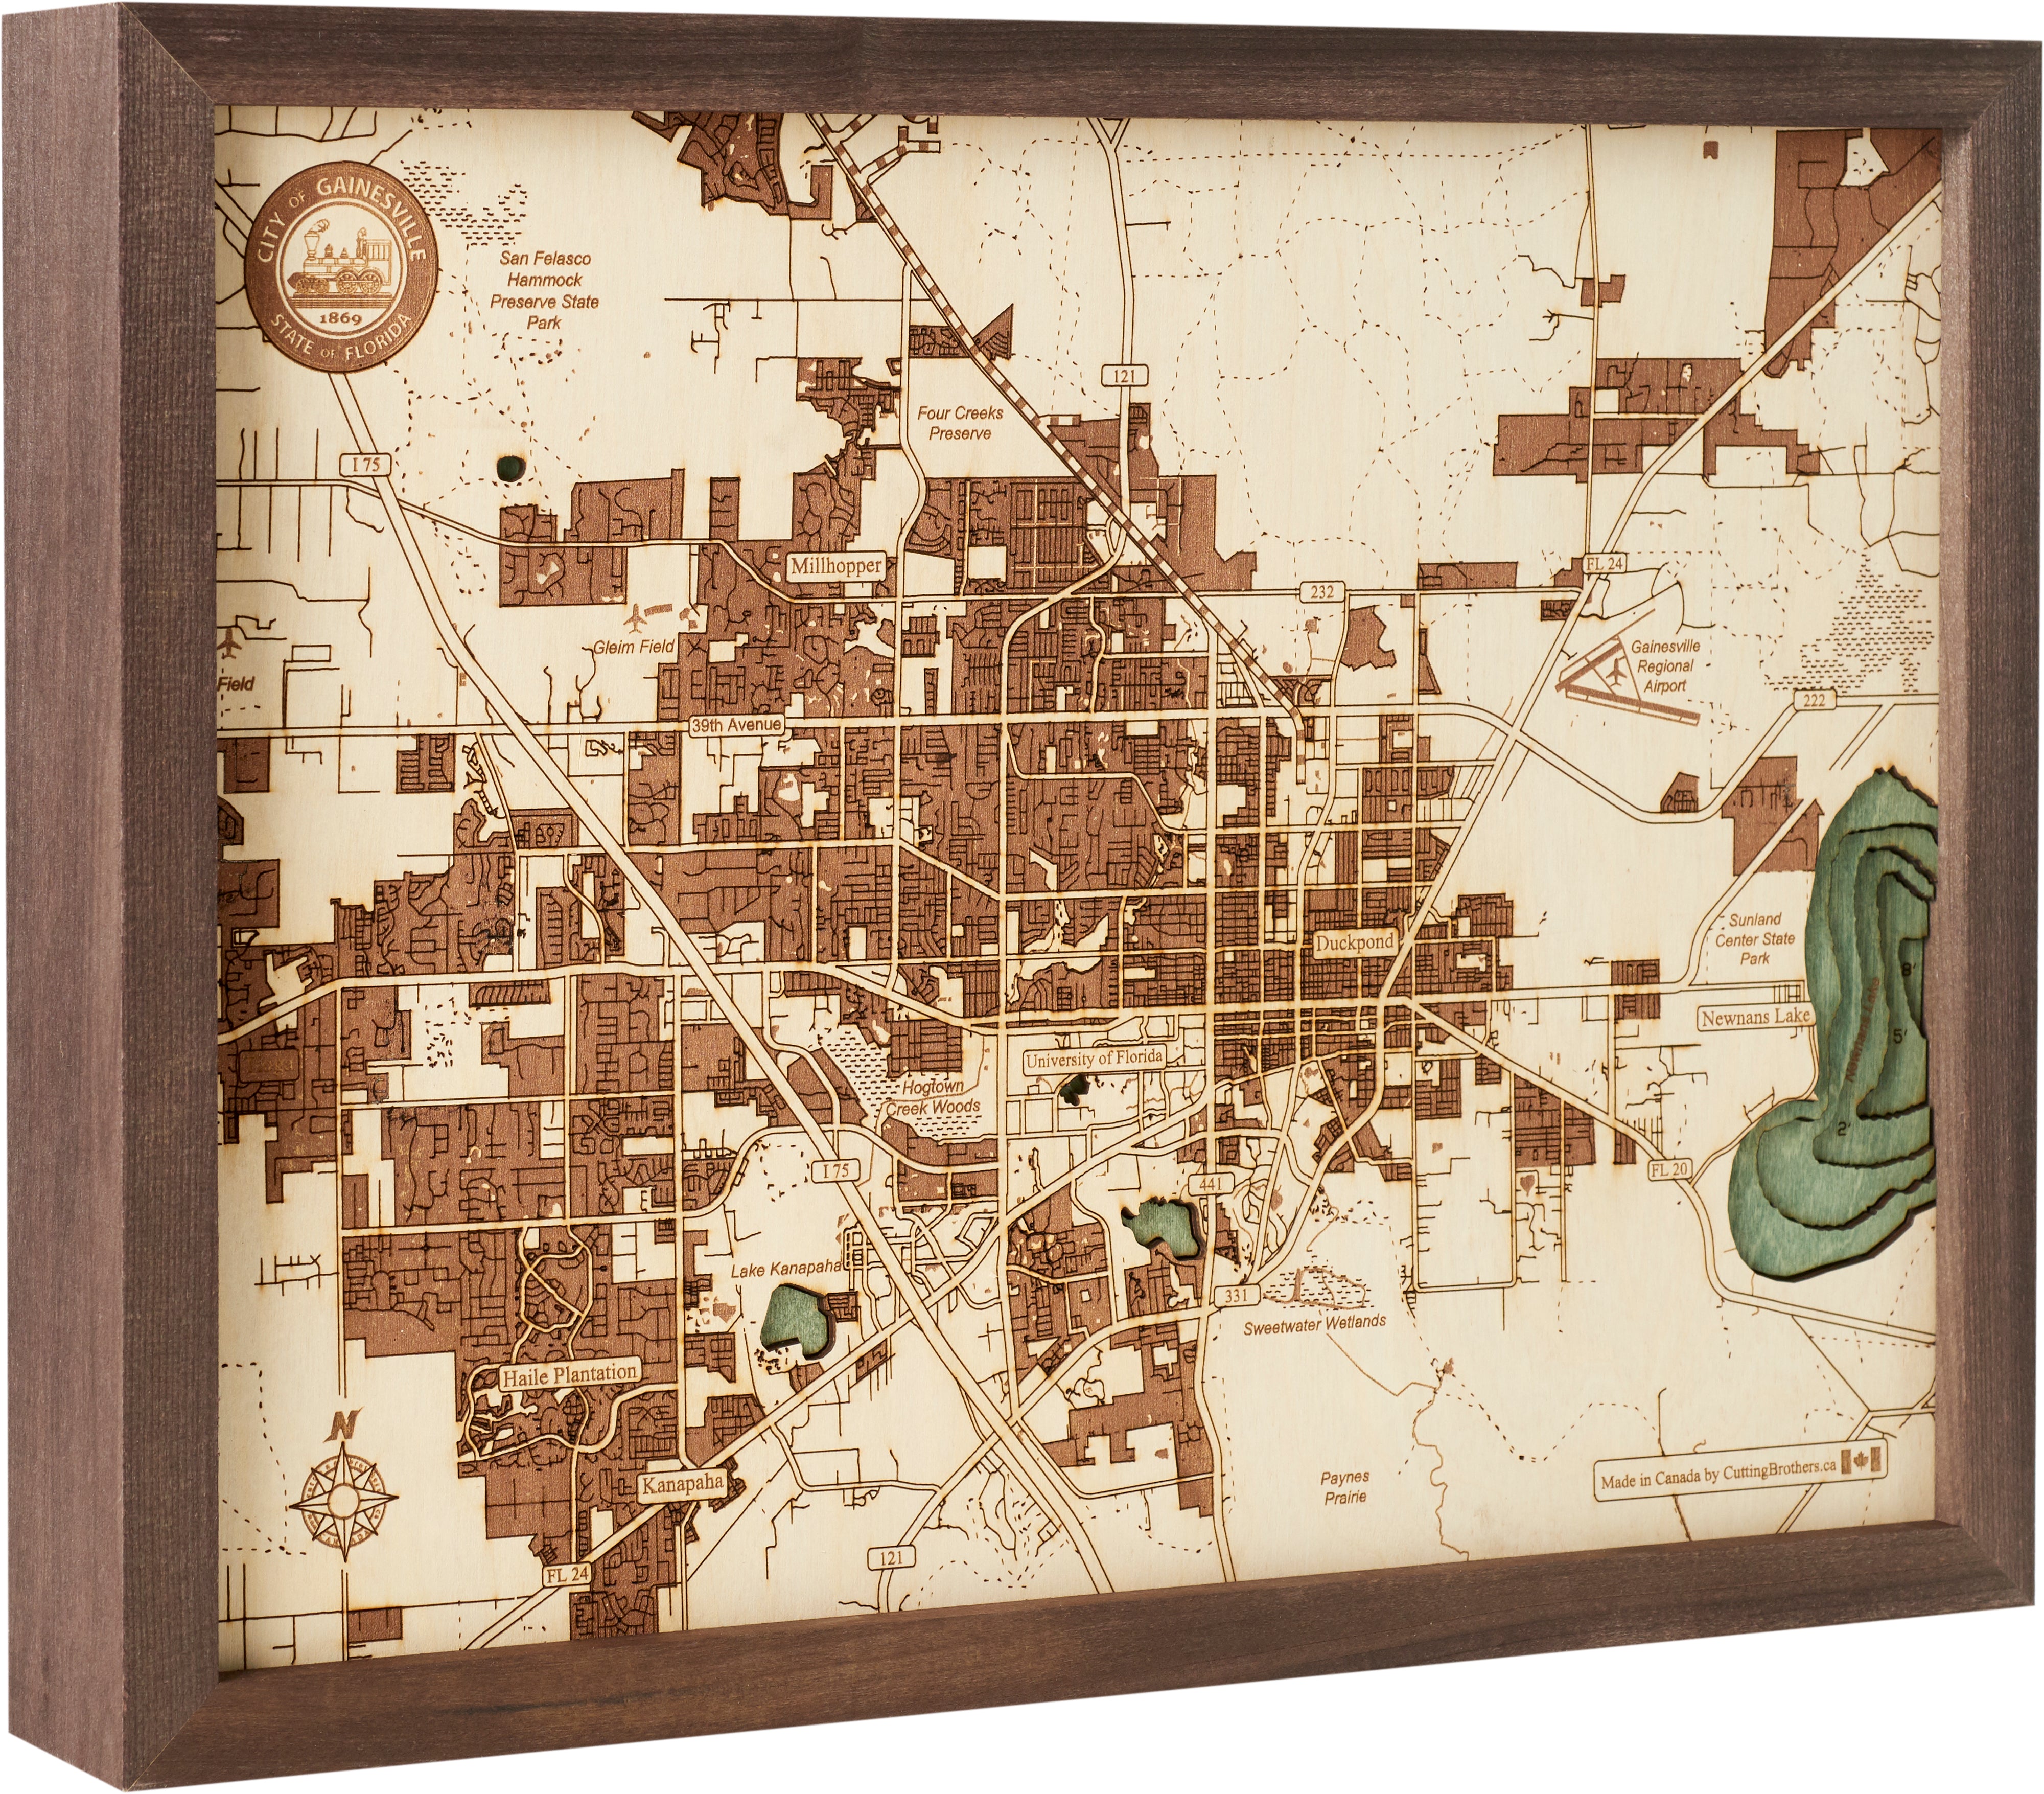 GAINESVILLE 3D WOODEN WALL MAP - Version S